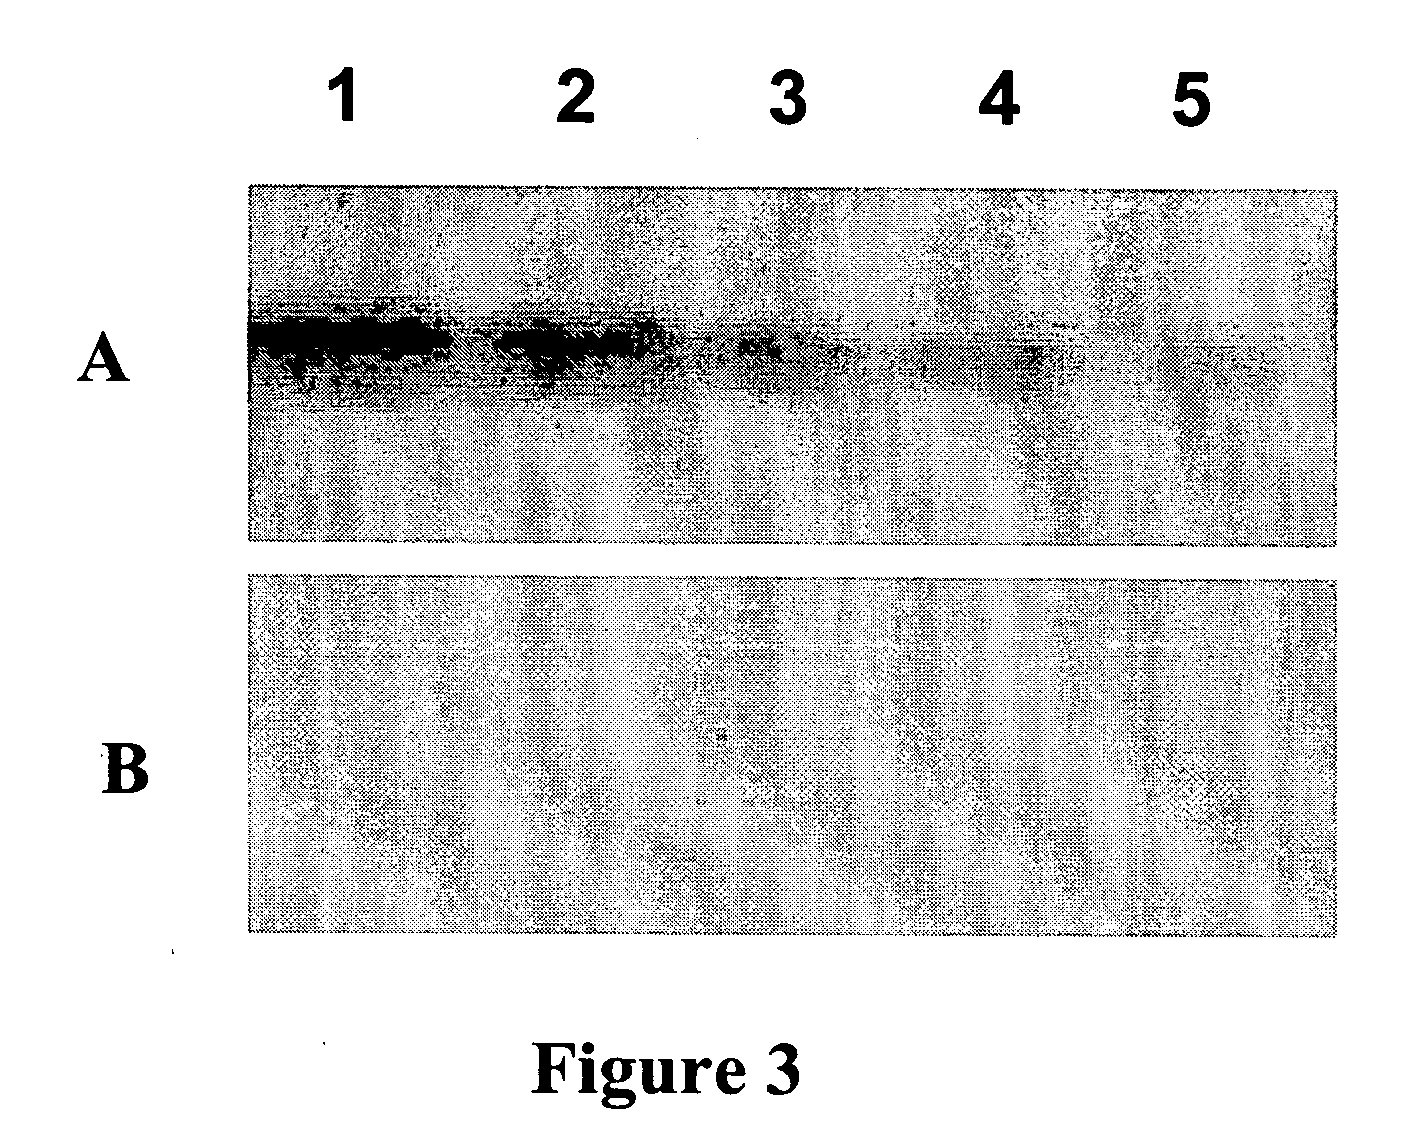 Devices and methods for profiling enzyme substrates